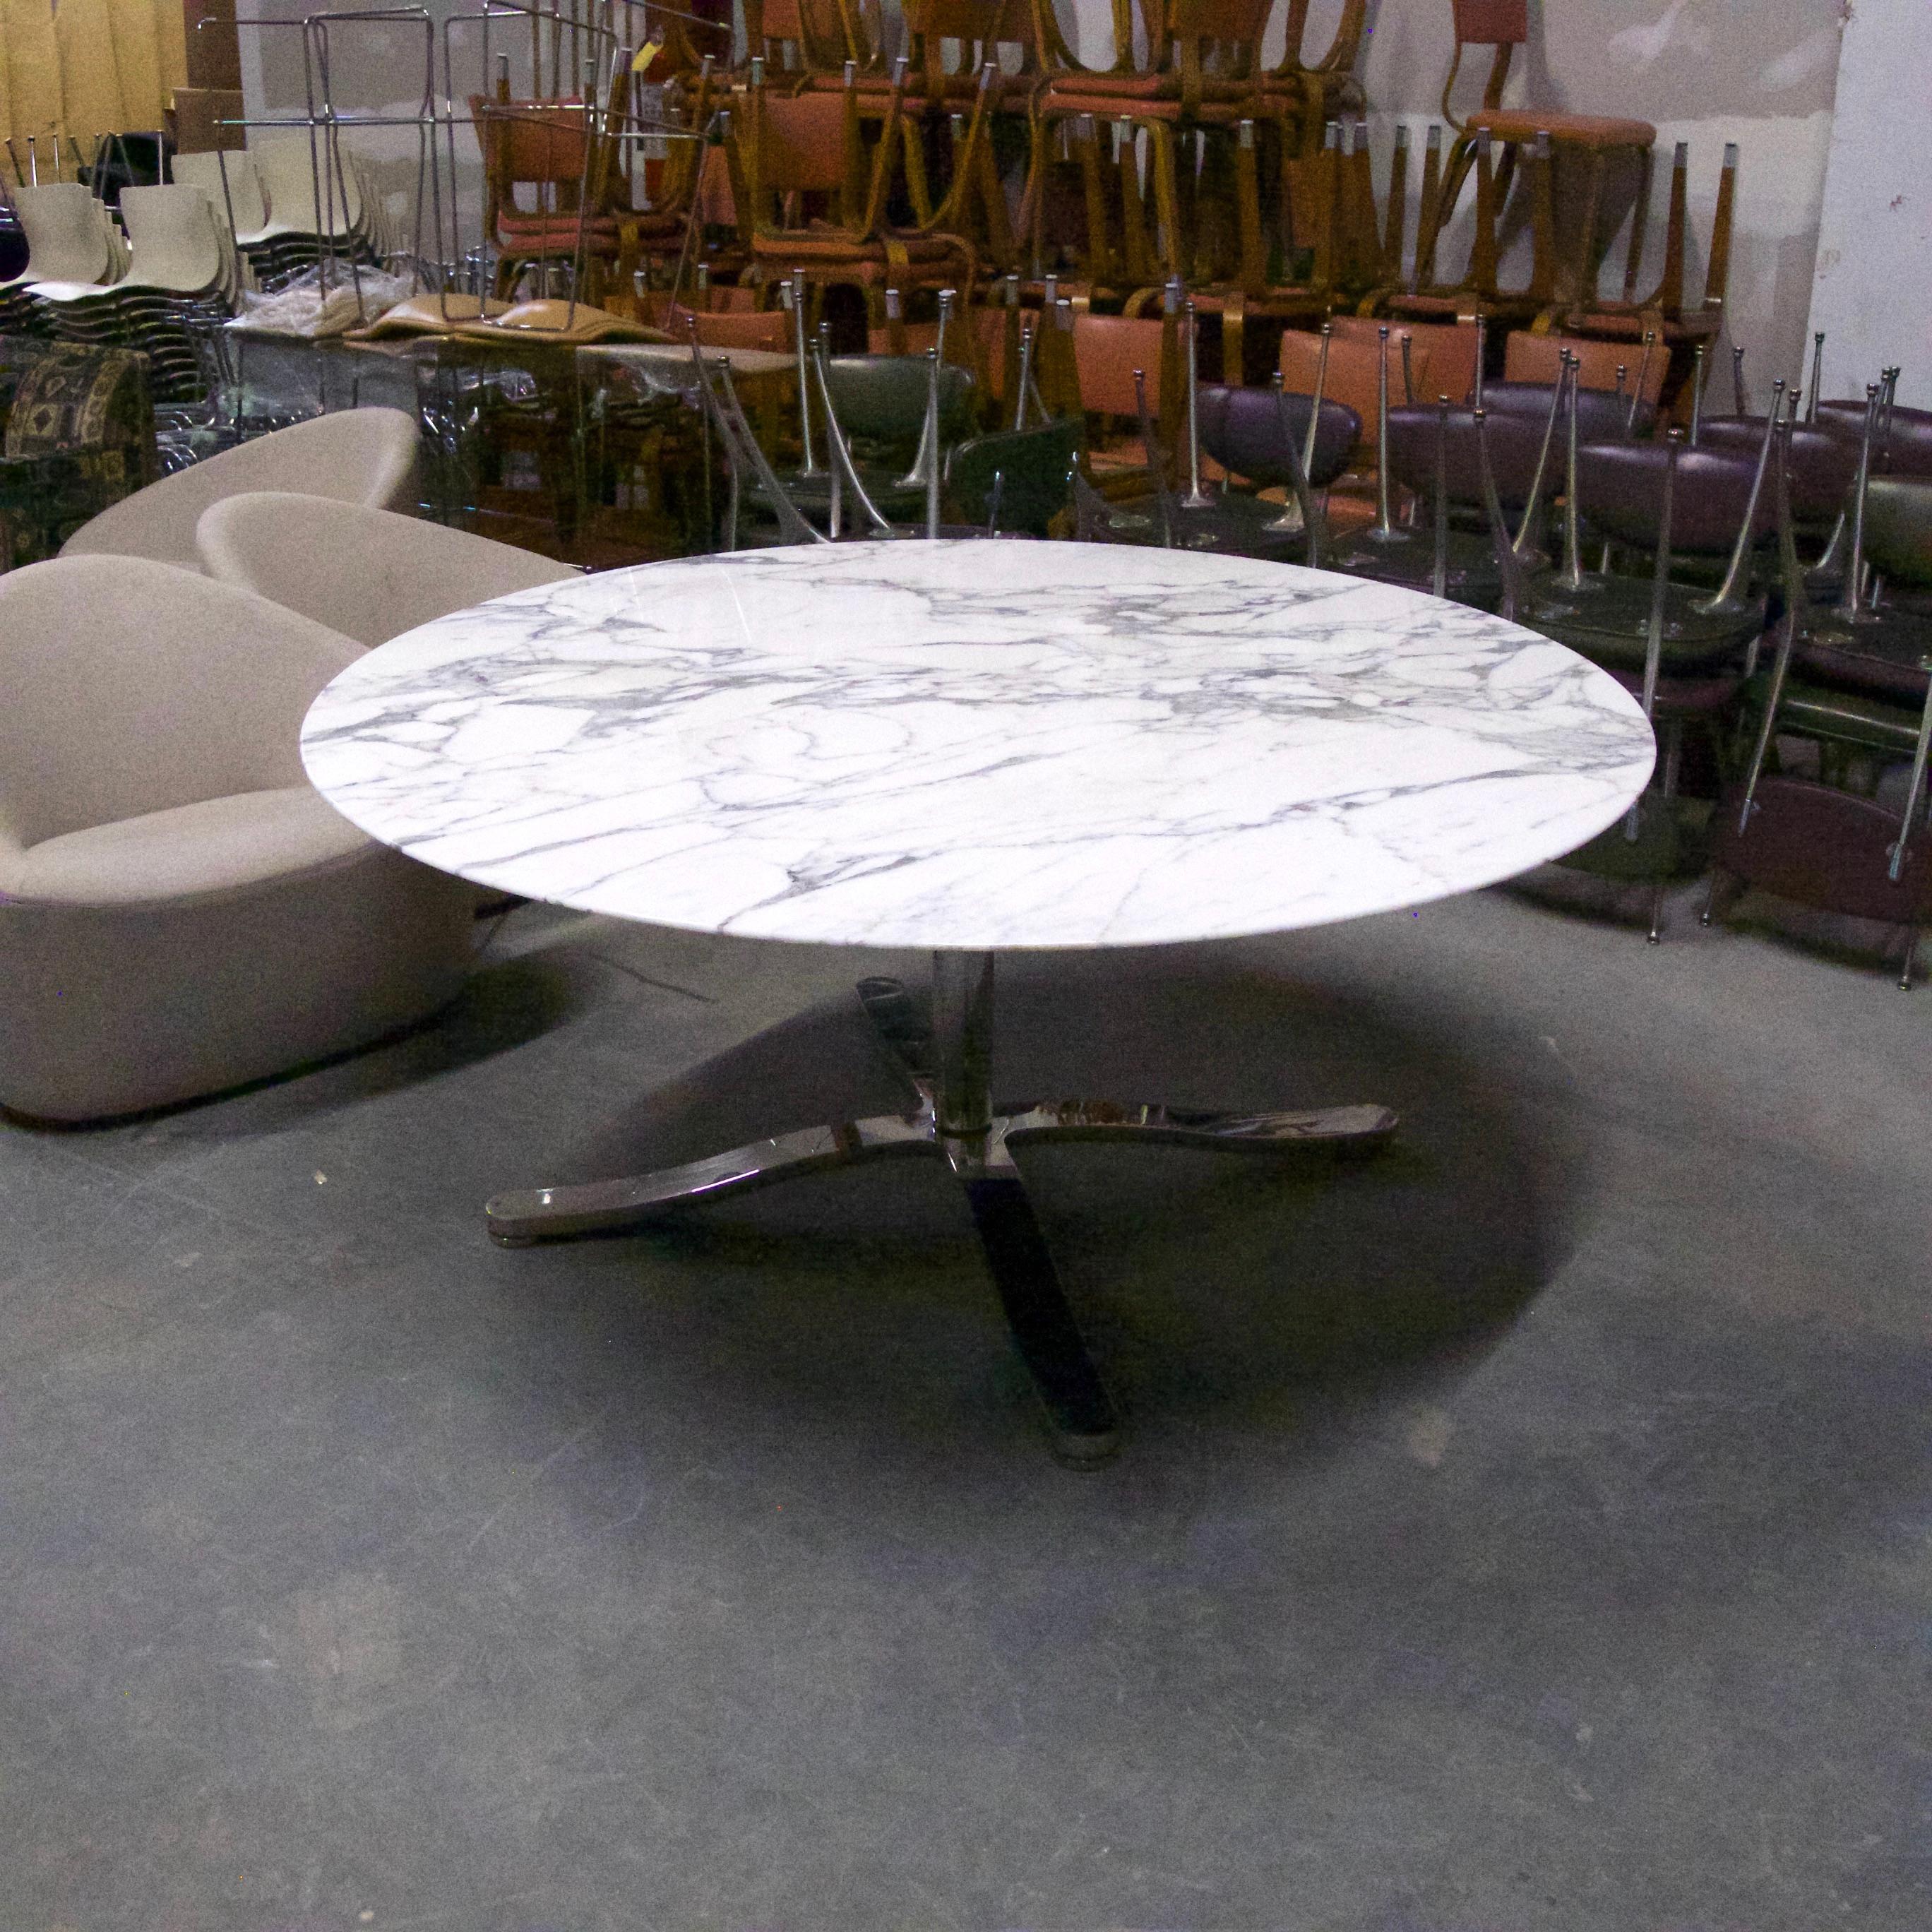 Beveled Monumental Nicos Zographos 5' Round Calacatta Marble Dining or Conference Table 